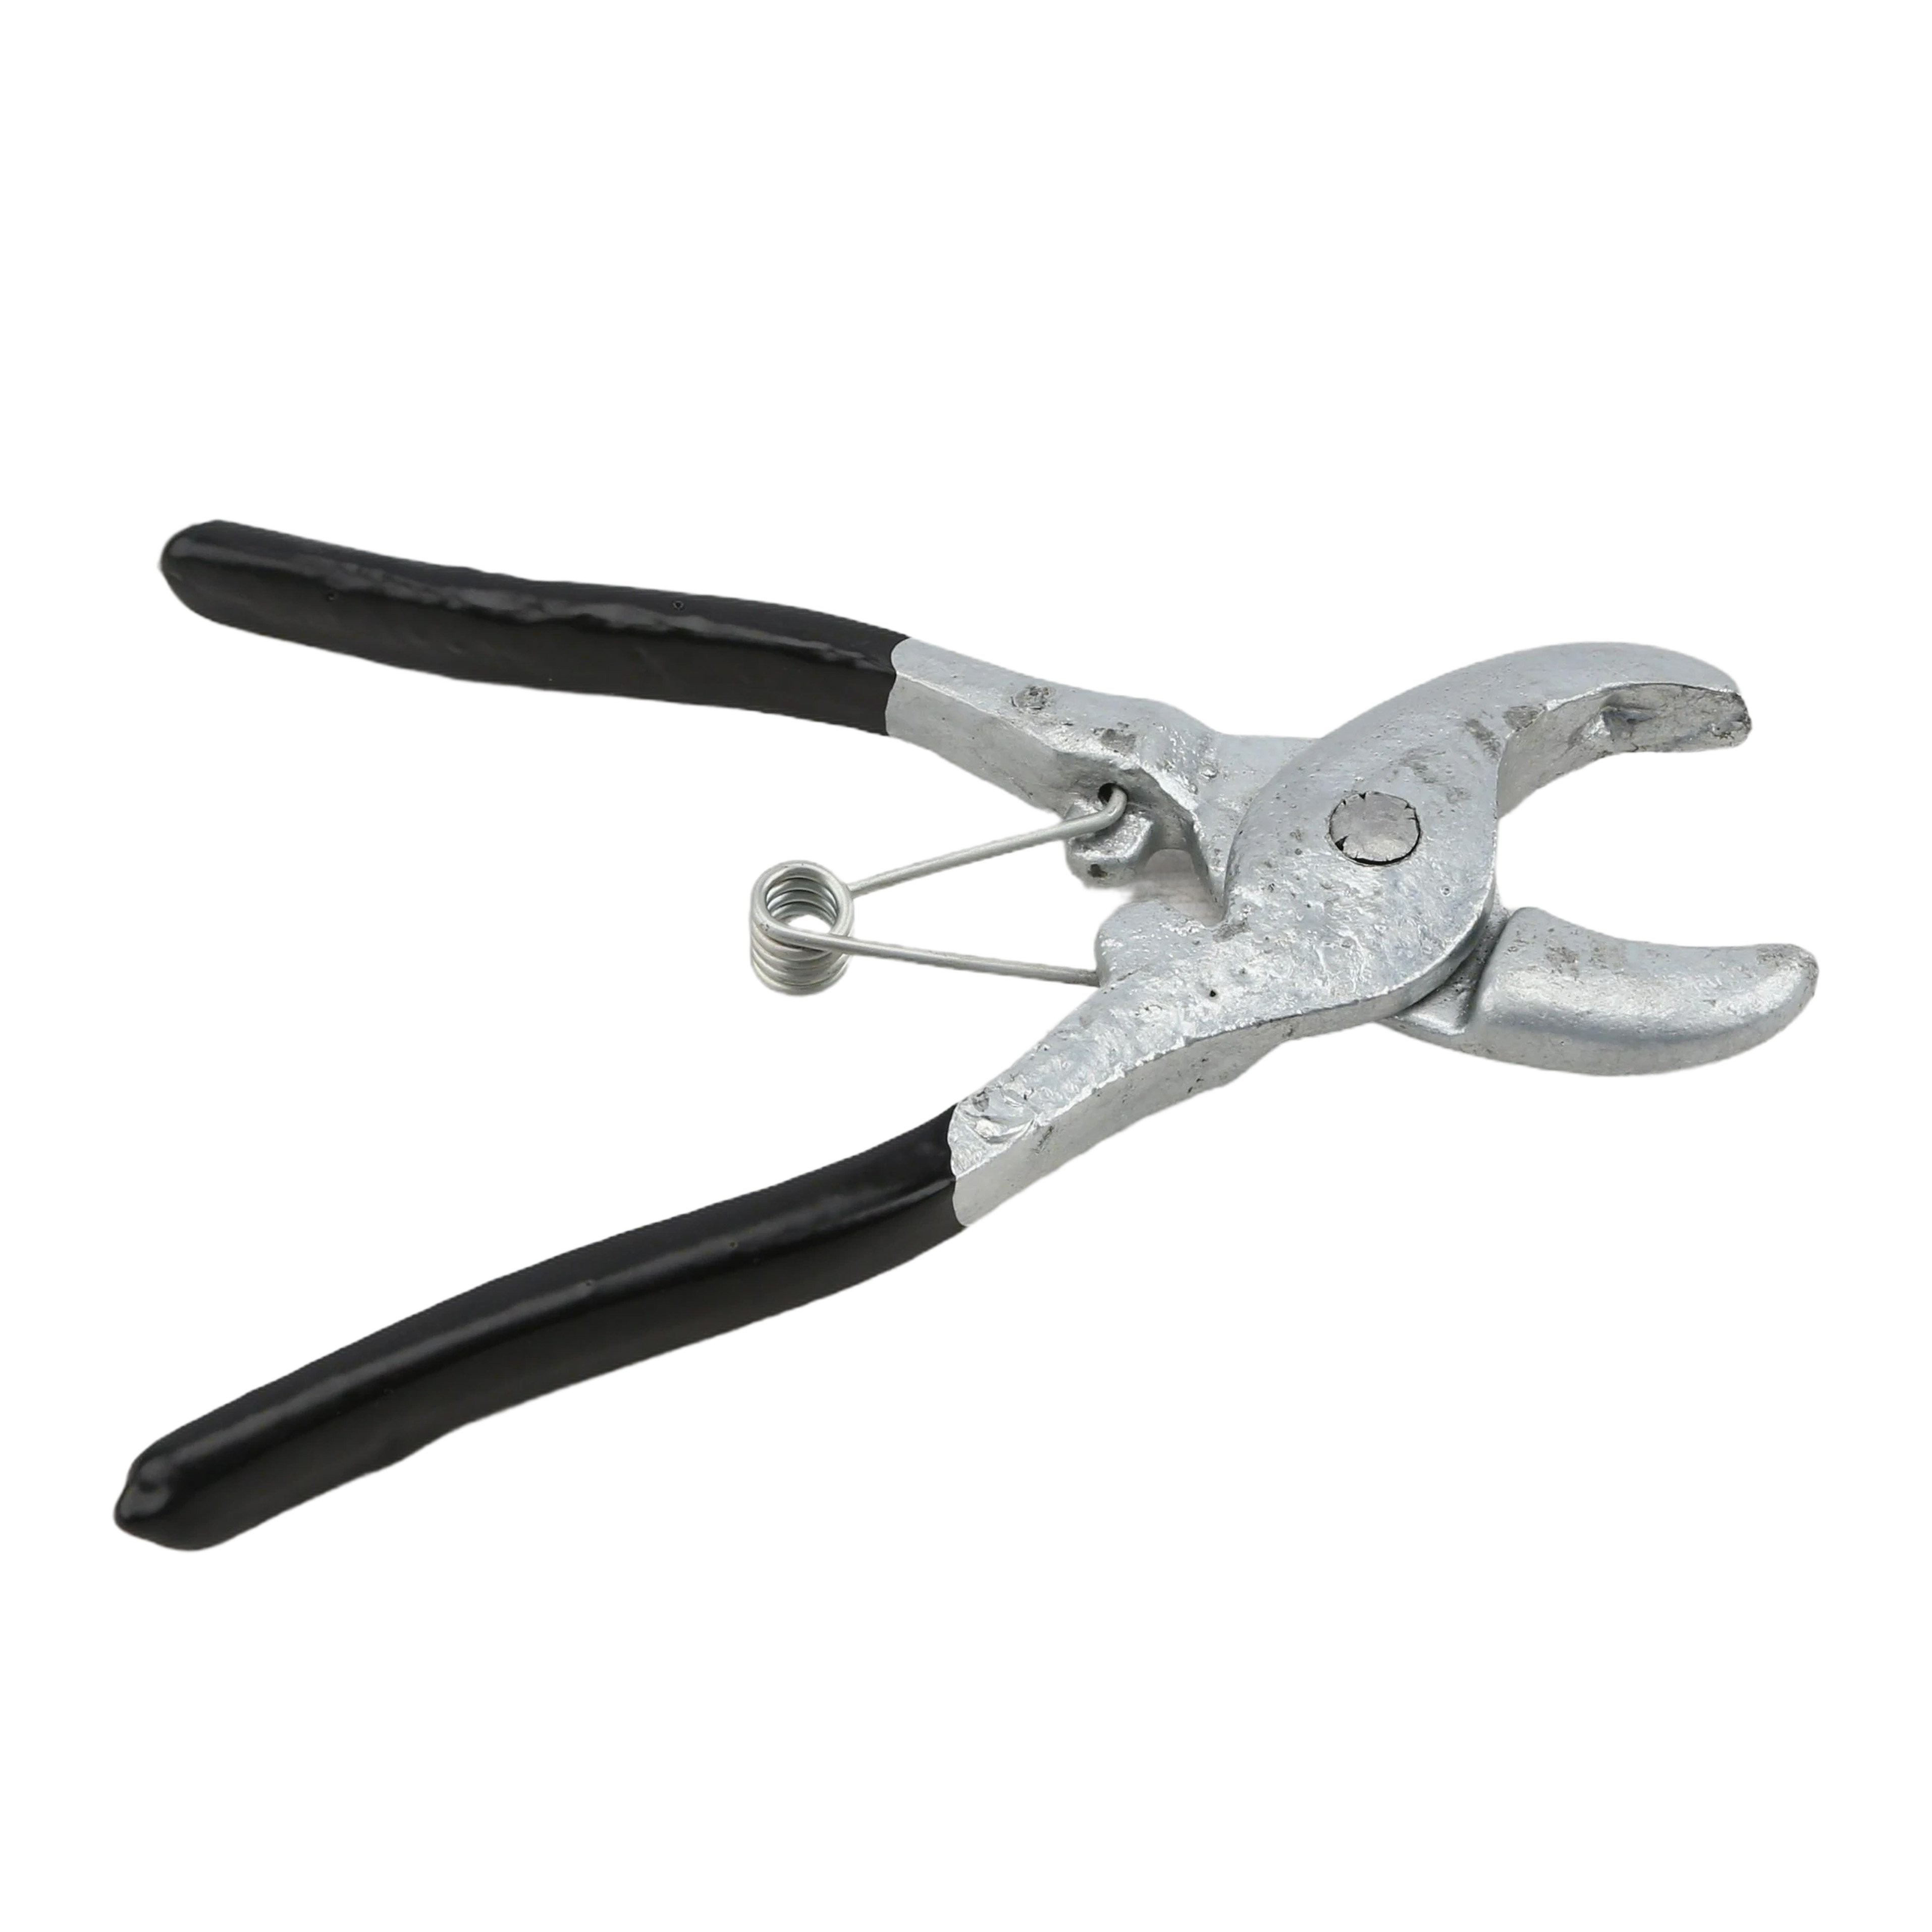 8 Spring Assist Hog Ring Pliers - Malleable Iron (Single Plier)